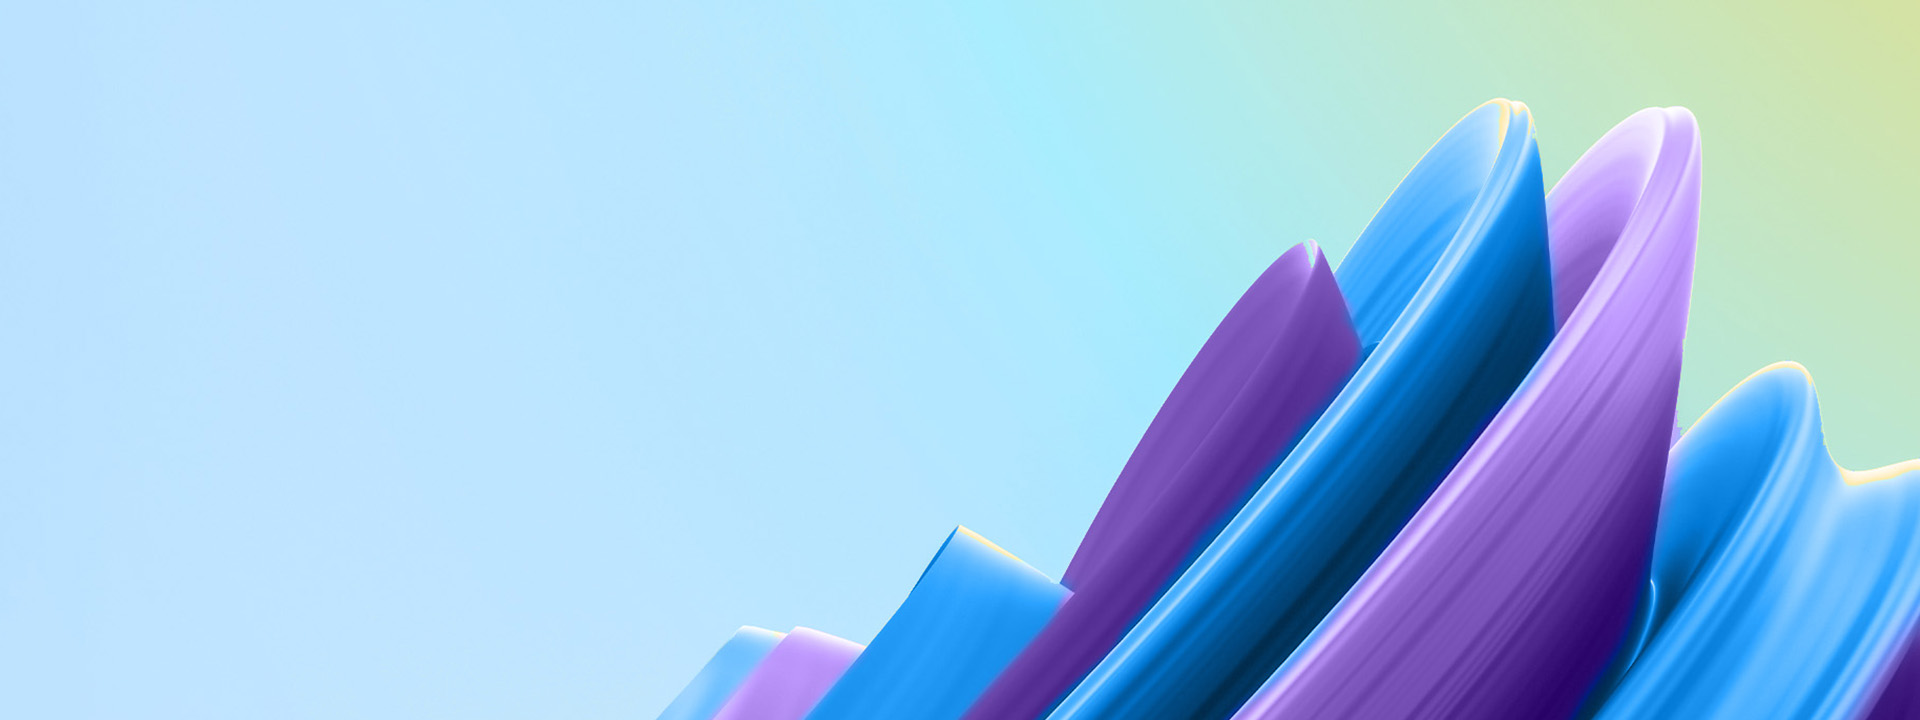 abstract blue and purple shapes on a light blue and green background